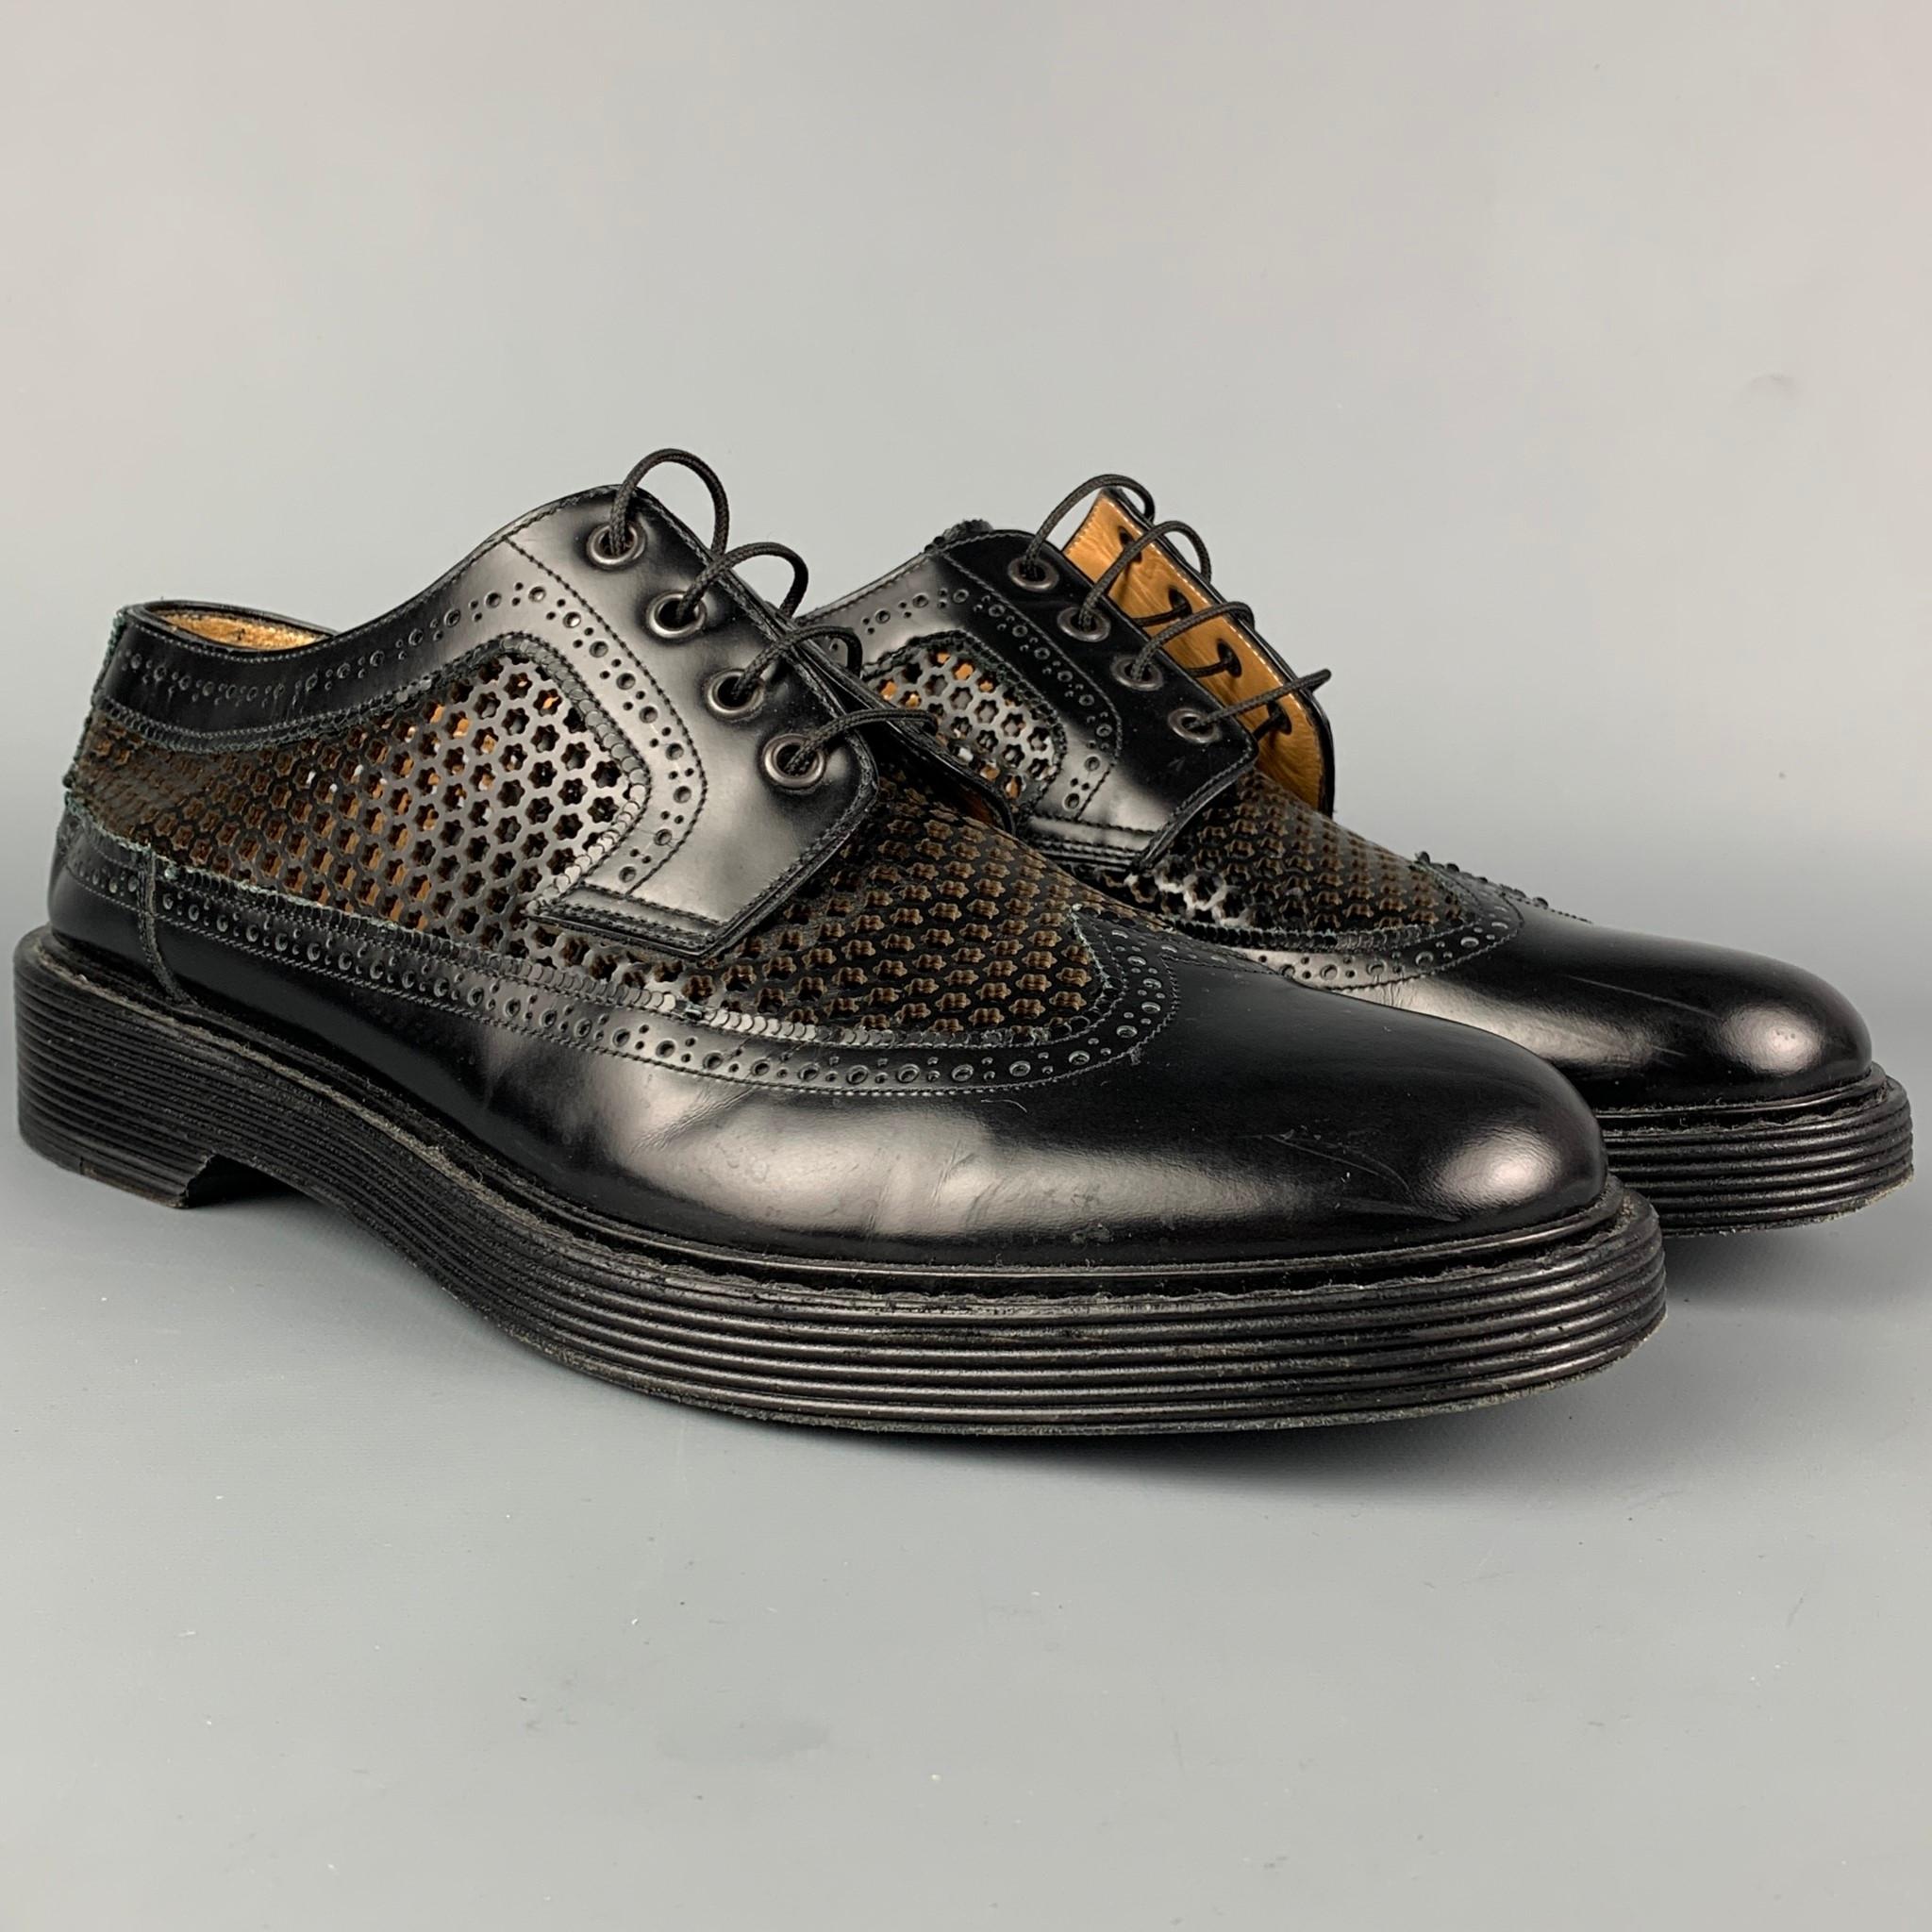 MARC JACOBS shoes comes in a black perforated leather featuring a wingtip style and a lace up closure. Made in Italy. 

Very Good Pre-Owned Condition.
Marked: 43/9
 
Outsole: 12.5 in. x 4.5 in. 